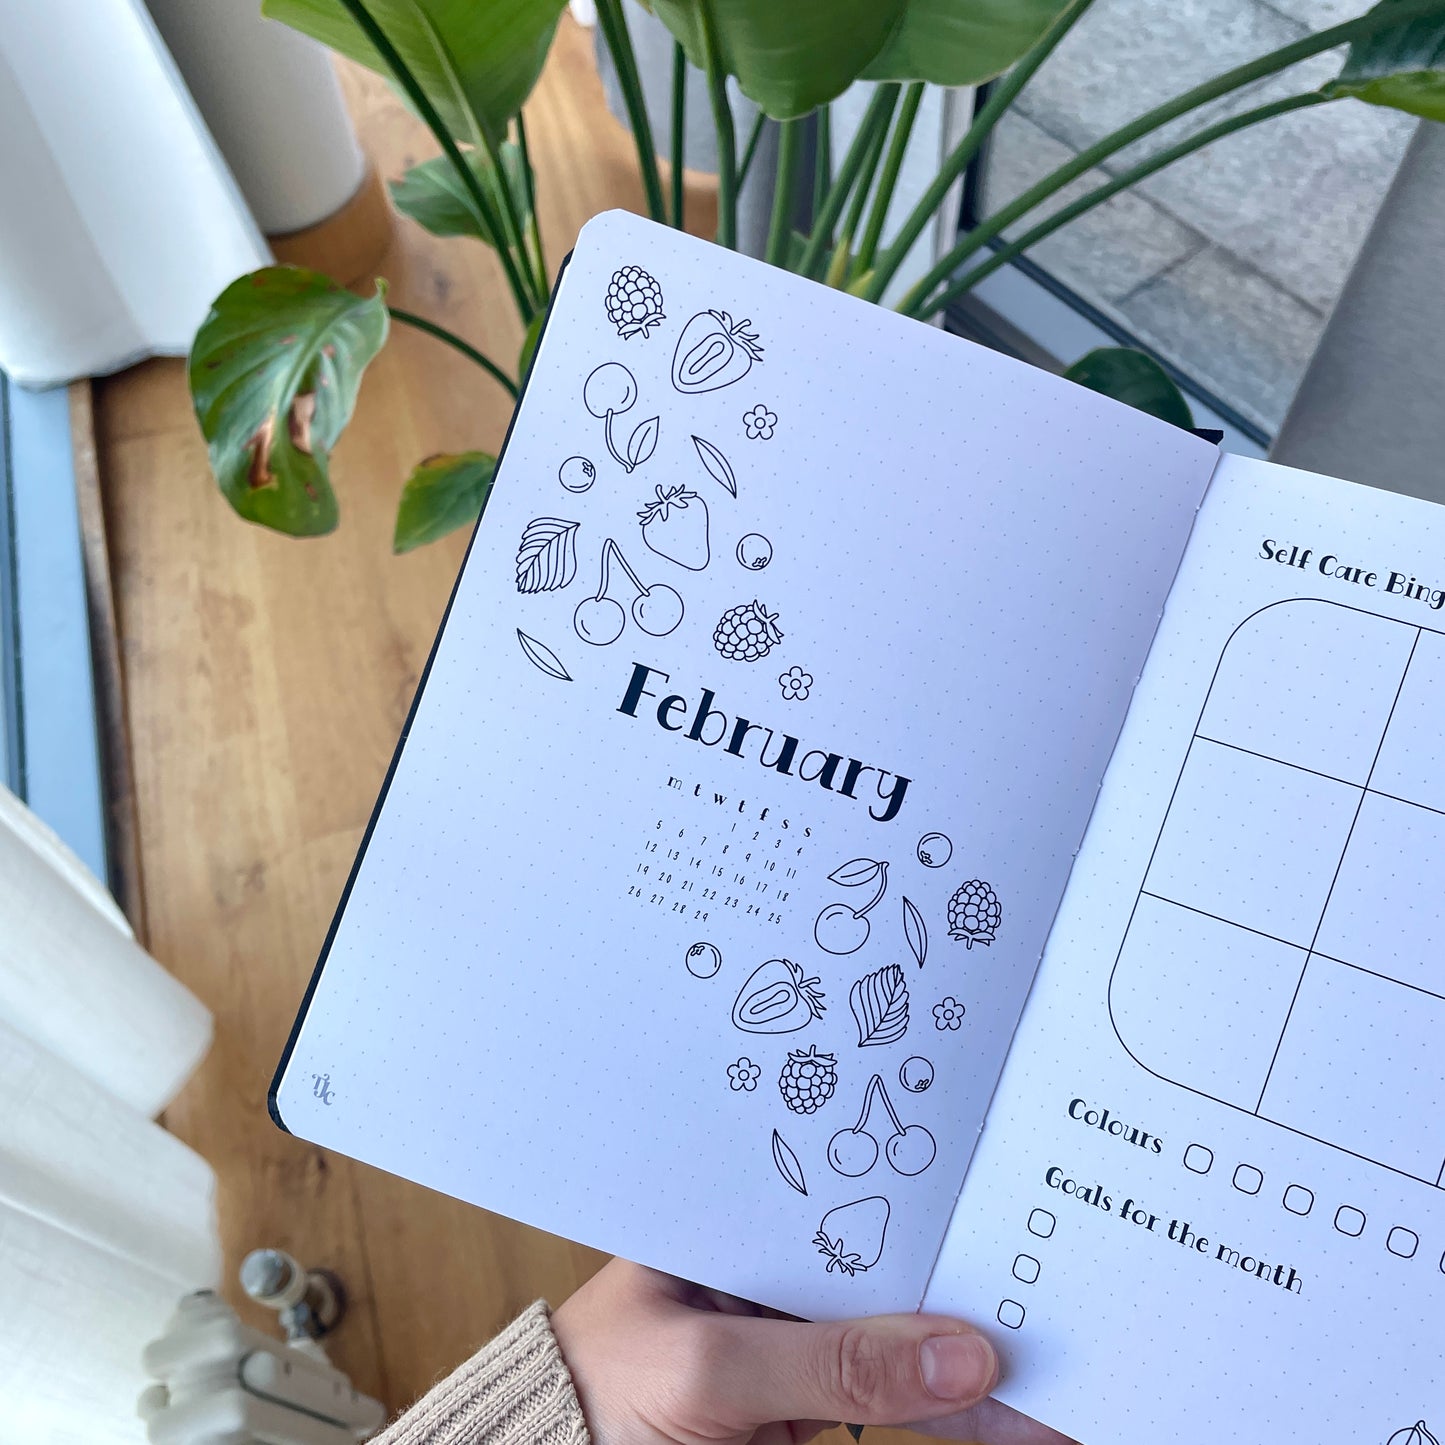 2024 Pre-made Bullet Journal – TheJournalClub